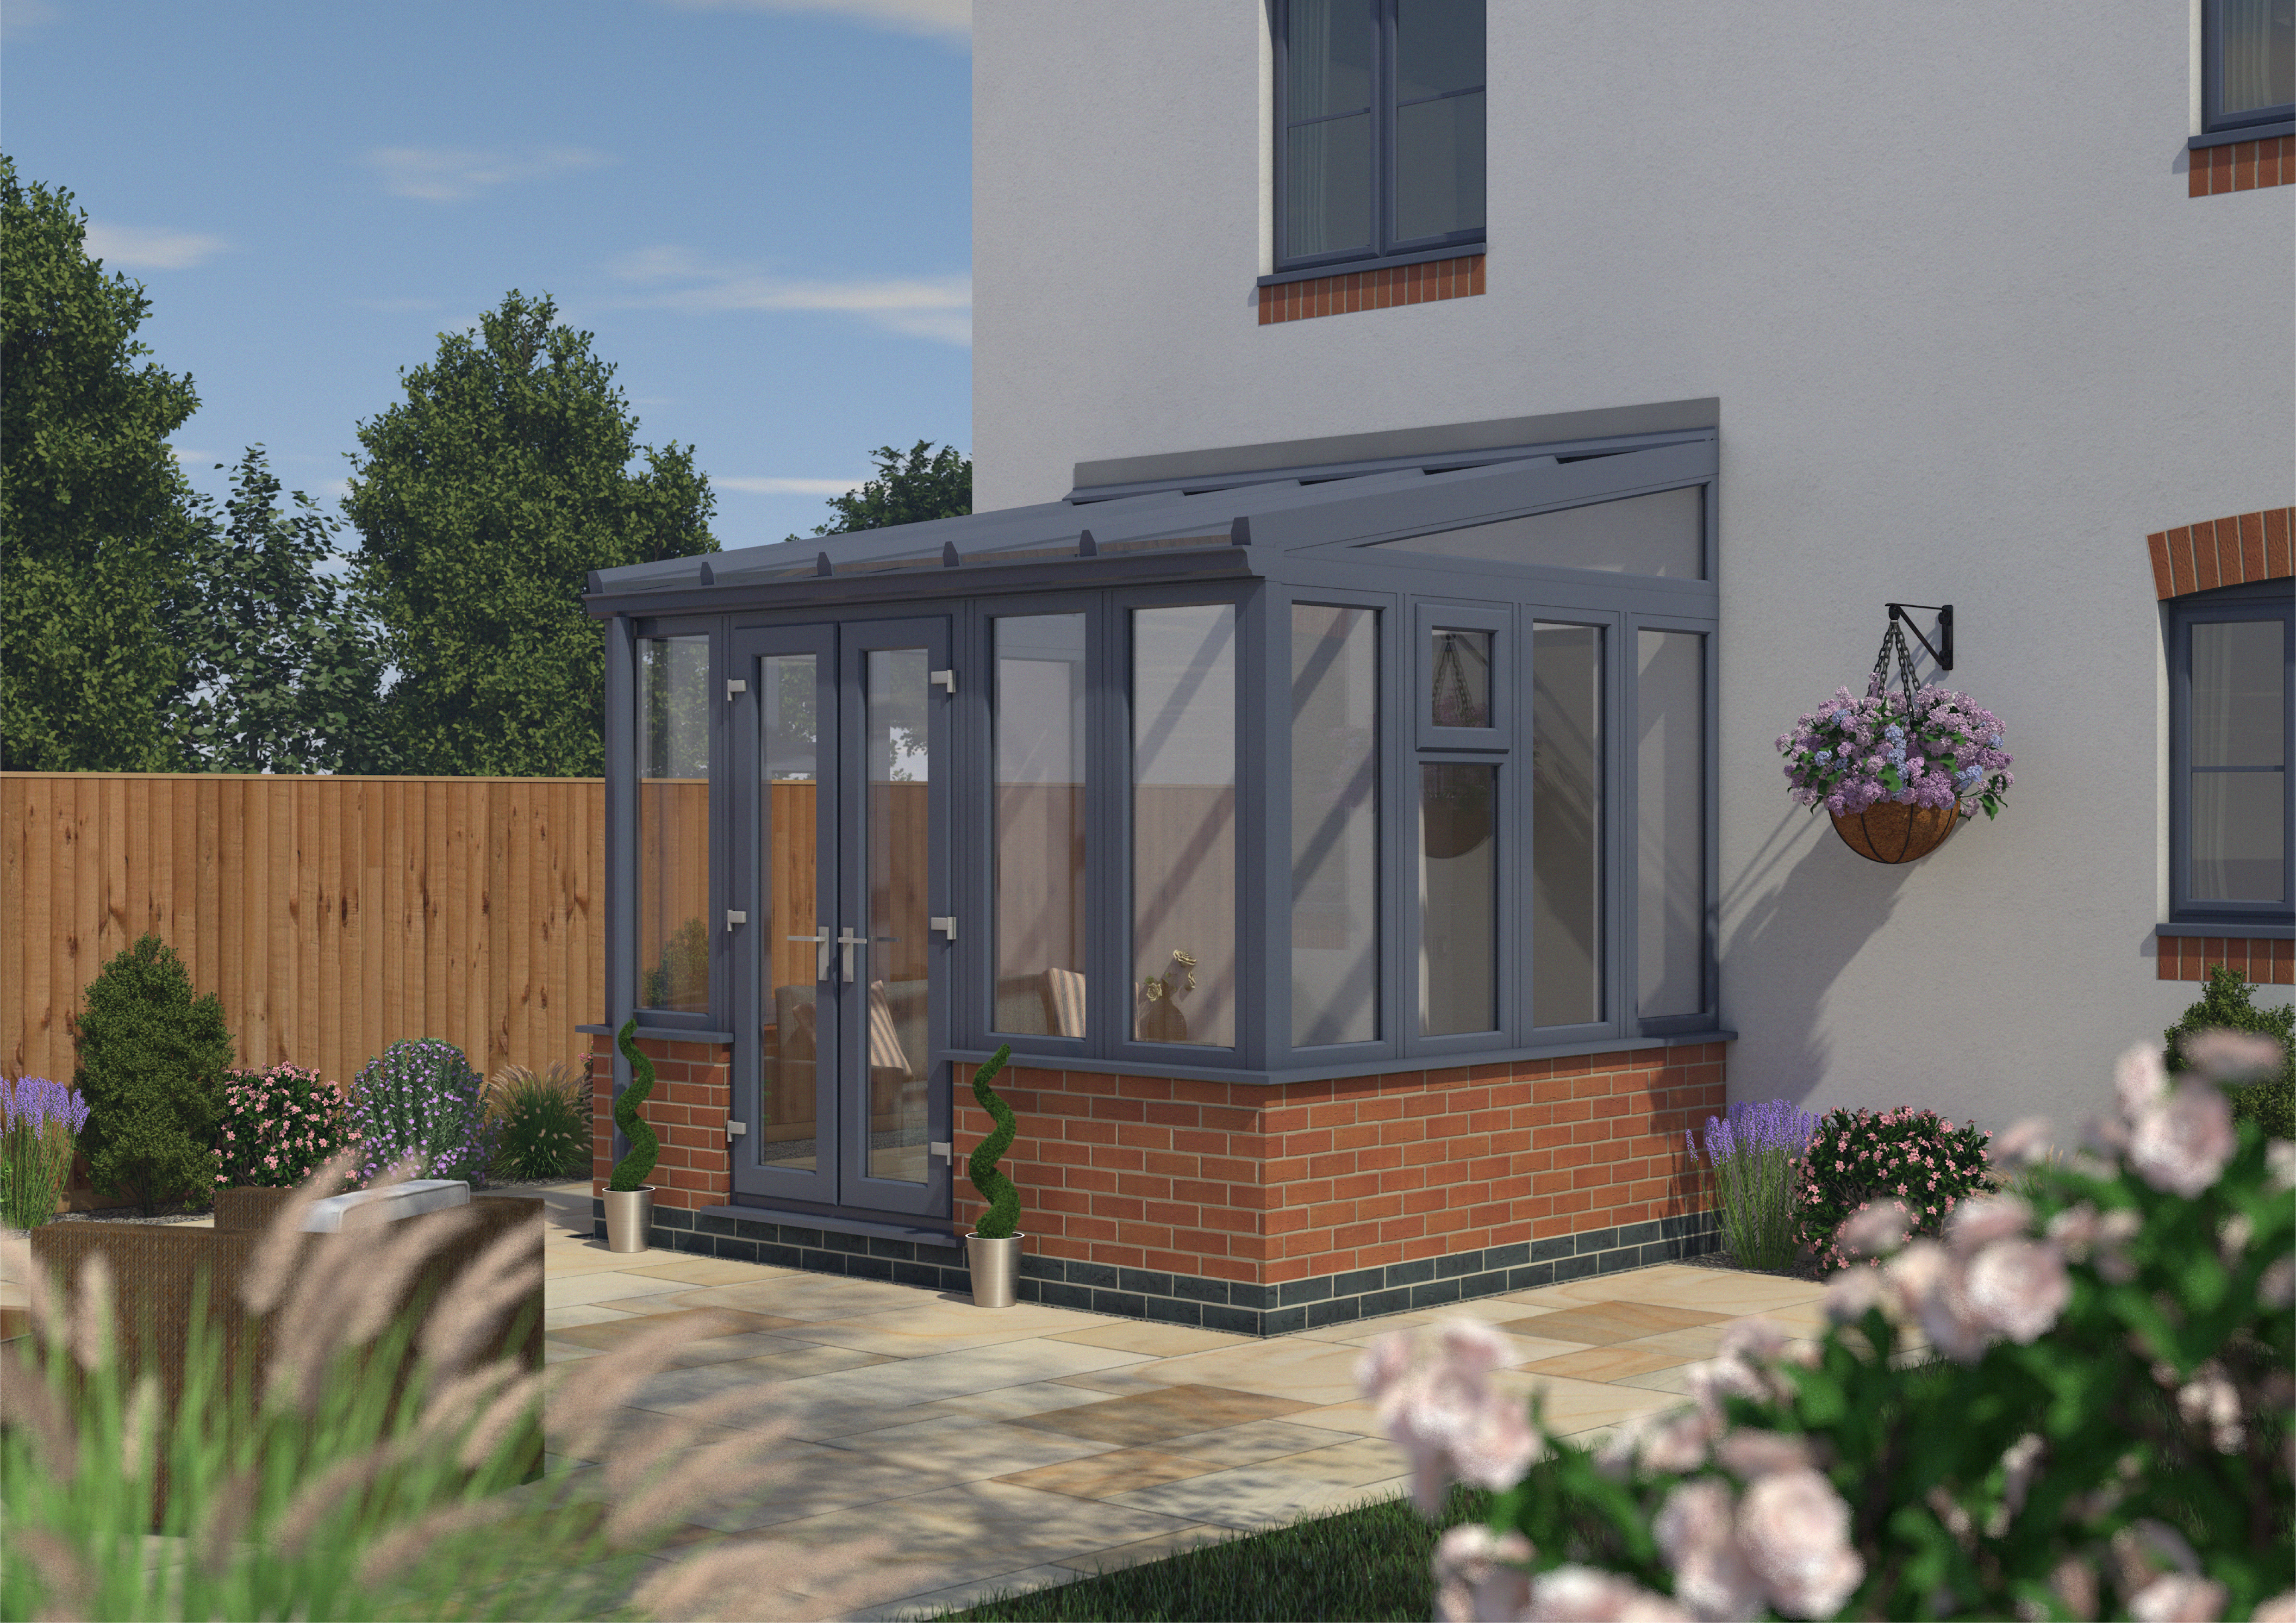 Image of Euramax Lean To Conservatory Dwarf Wall - Anthracite Grey - 10 ft x 8ft